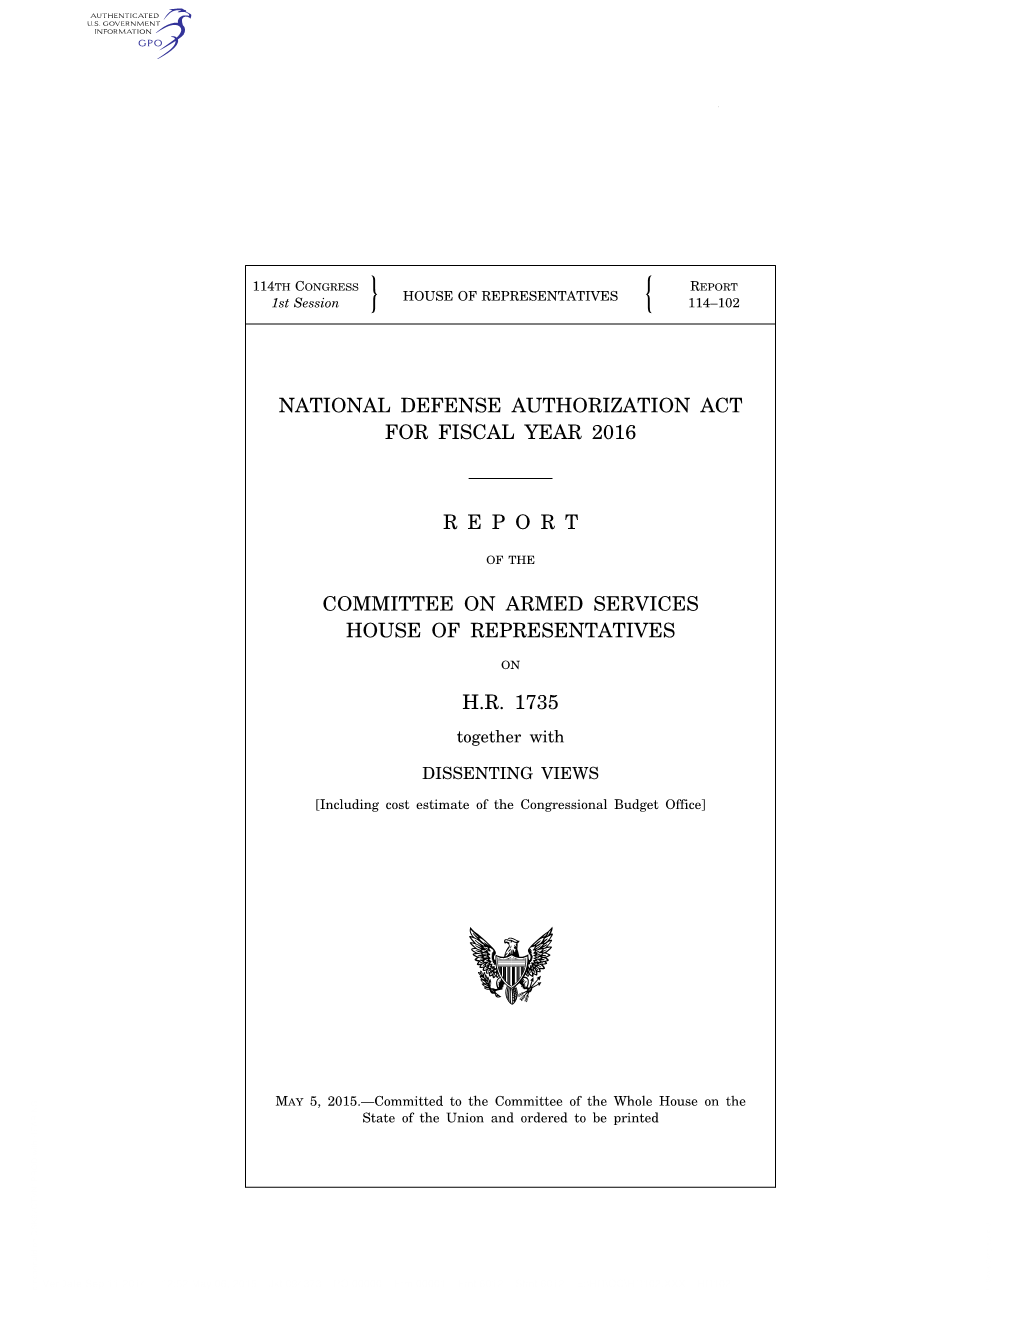 National Defense Authorization Act for Fiscal Year 2016 R E P O R T Committee on Armed Services House of Representatives H.R. 17